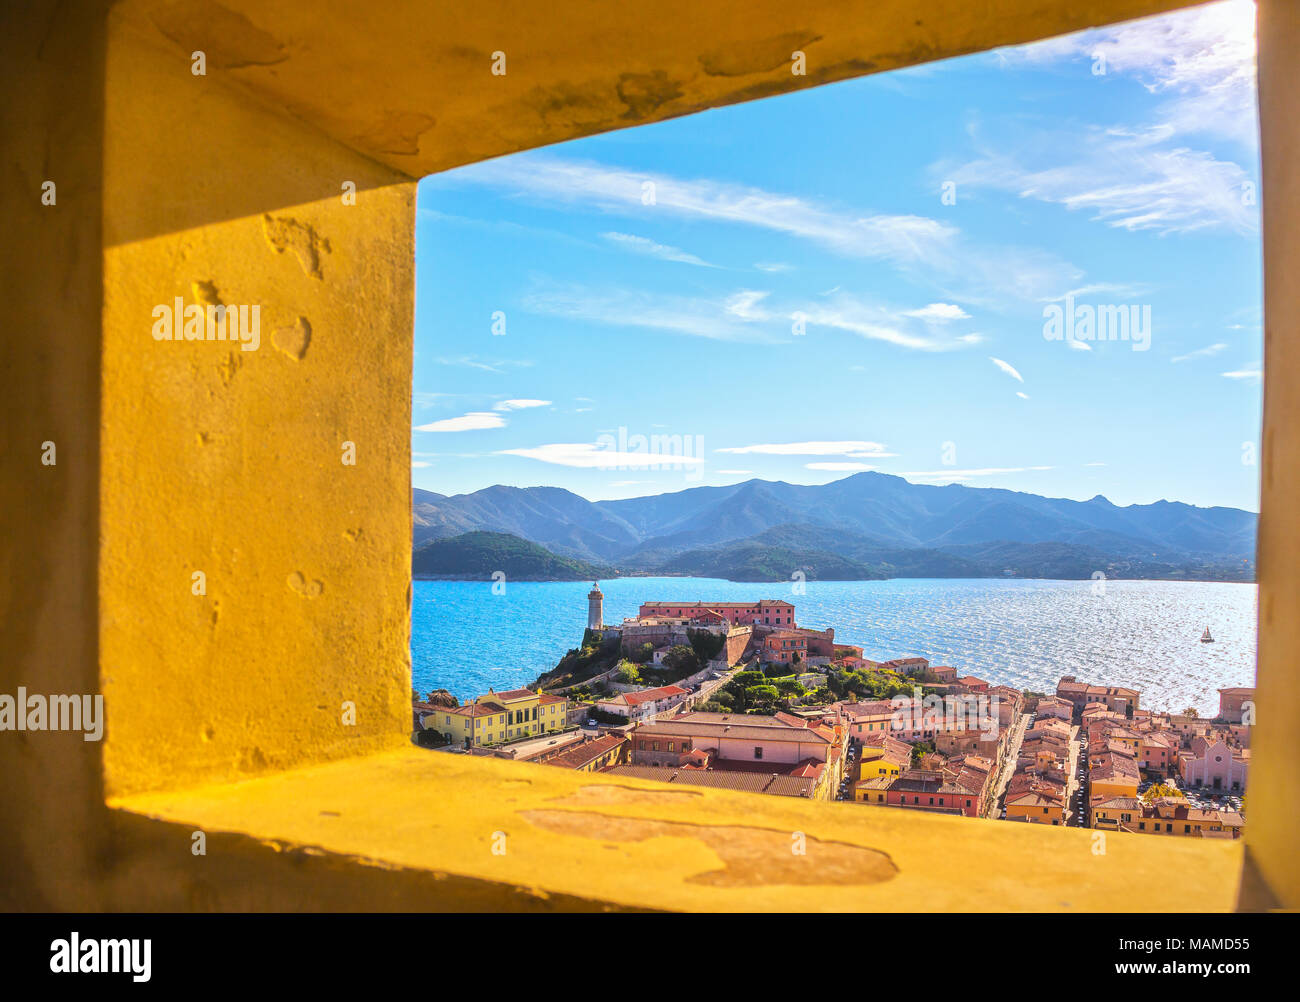 Elba island, Portoferraio aerial view from old window, Lighthouse and fort. Tuscany, Italy, Europe. Stock Photo